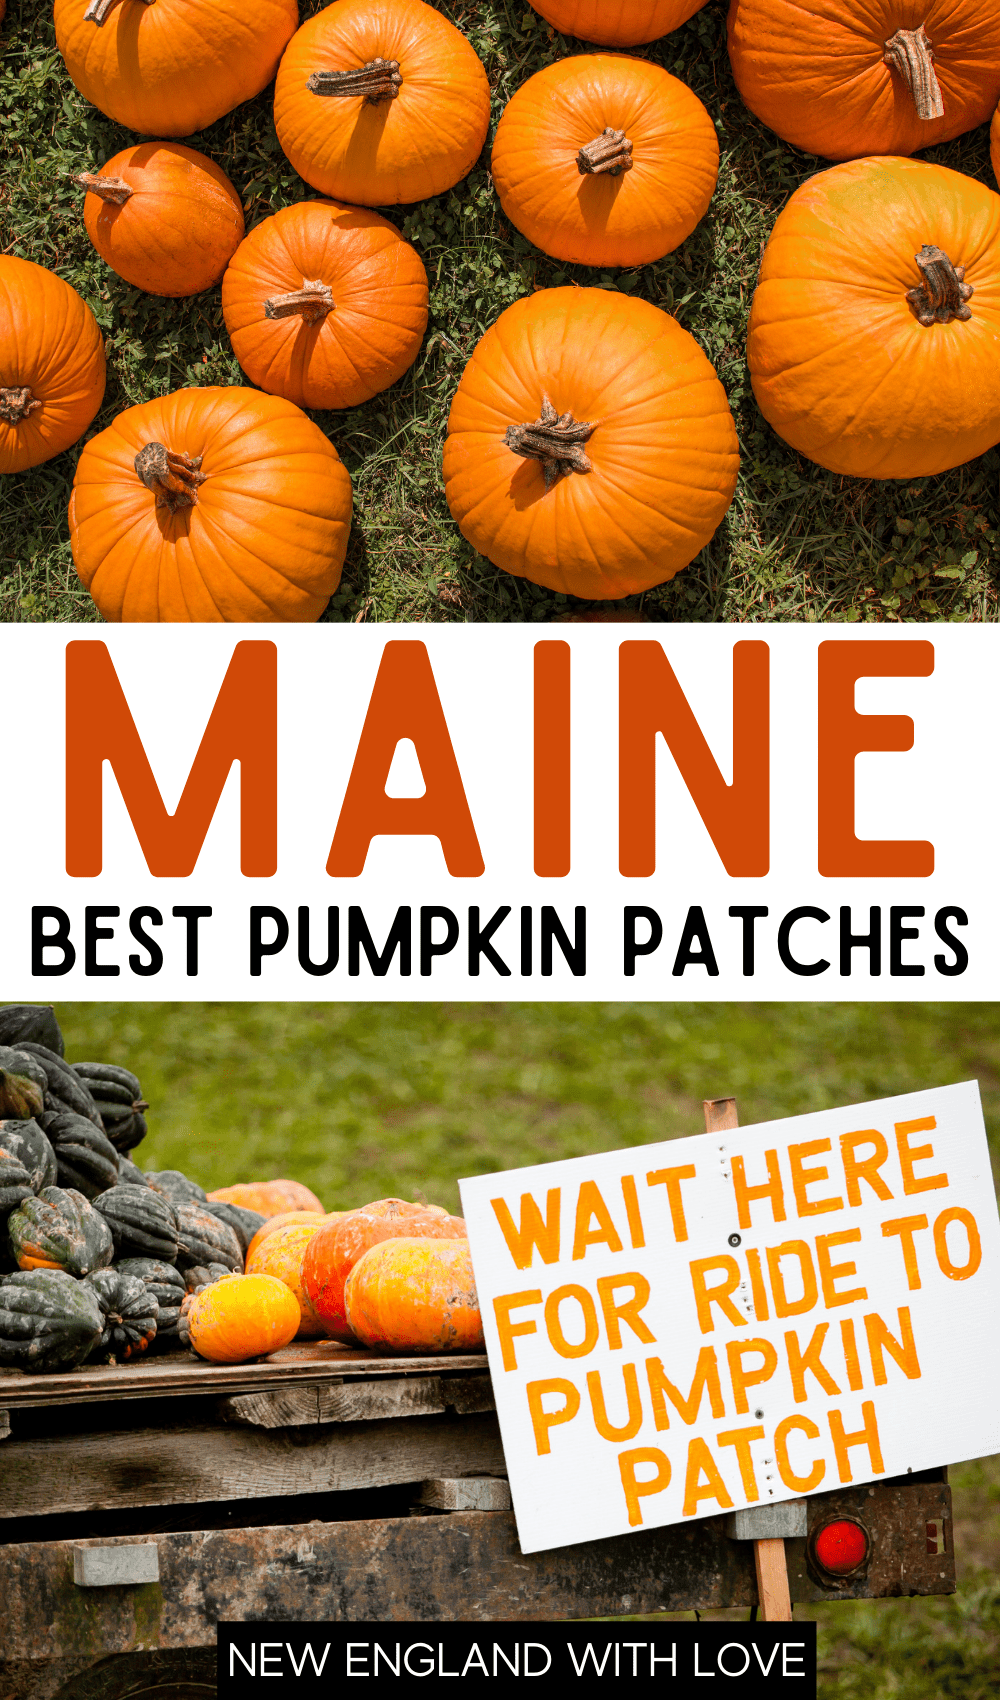 Pinterest graphic reading "MAINE" in large orange letters. Underneath that is reads "BEST PUMPKIN PATCHES" in black letters